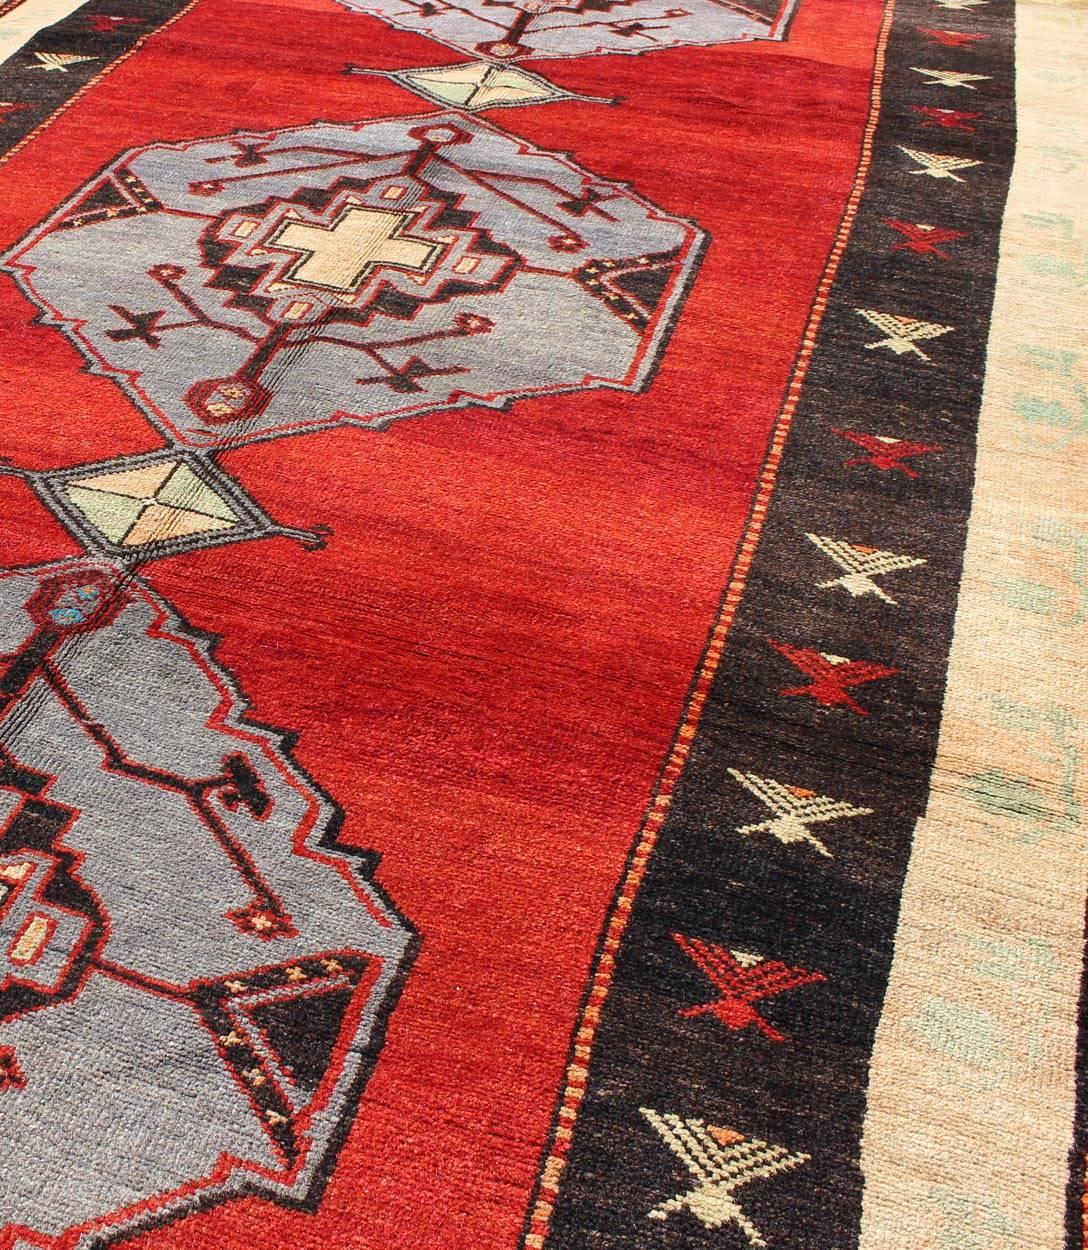 Vintage Turkish Rug With Multi-Layered Diamond Medallions in Beautiful Red In Excellent Condition For Sale In Atlanta, GA